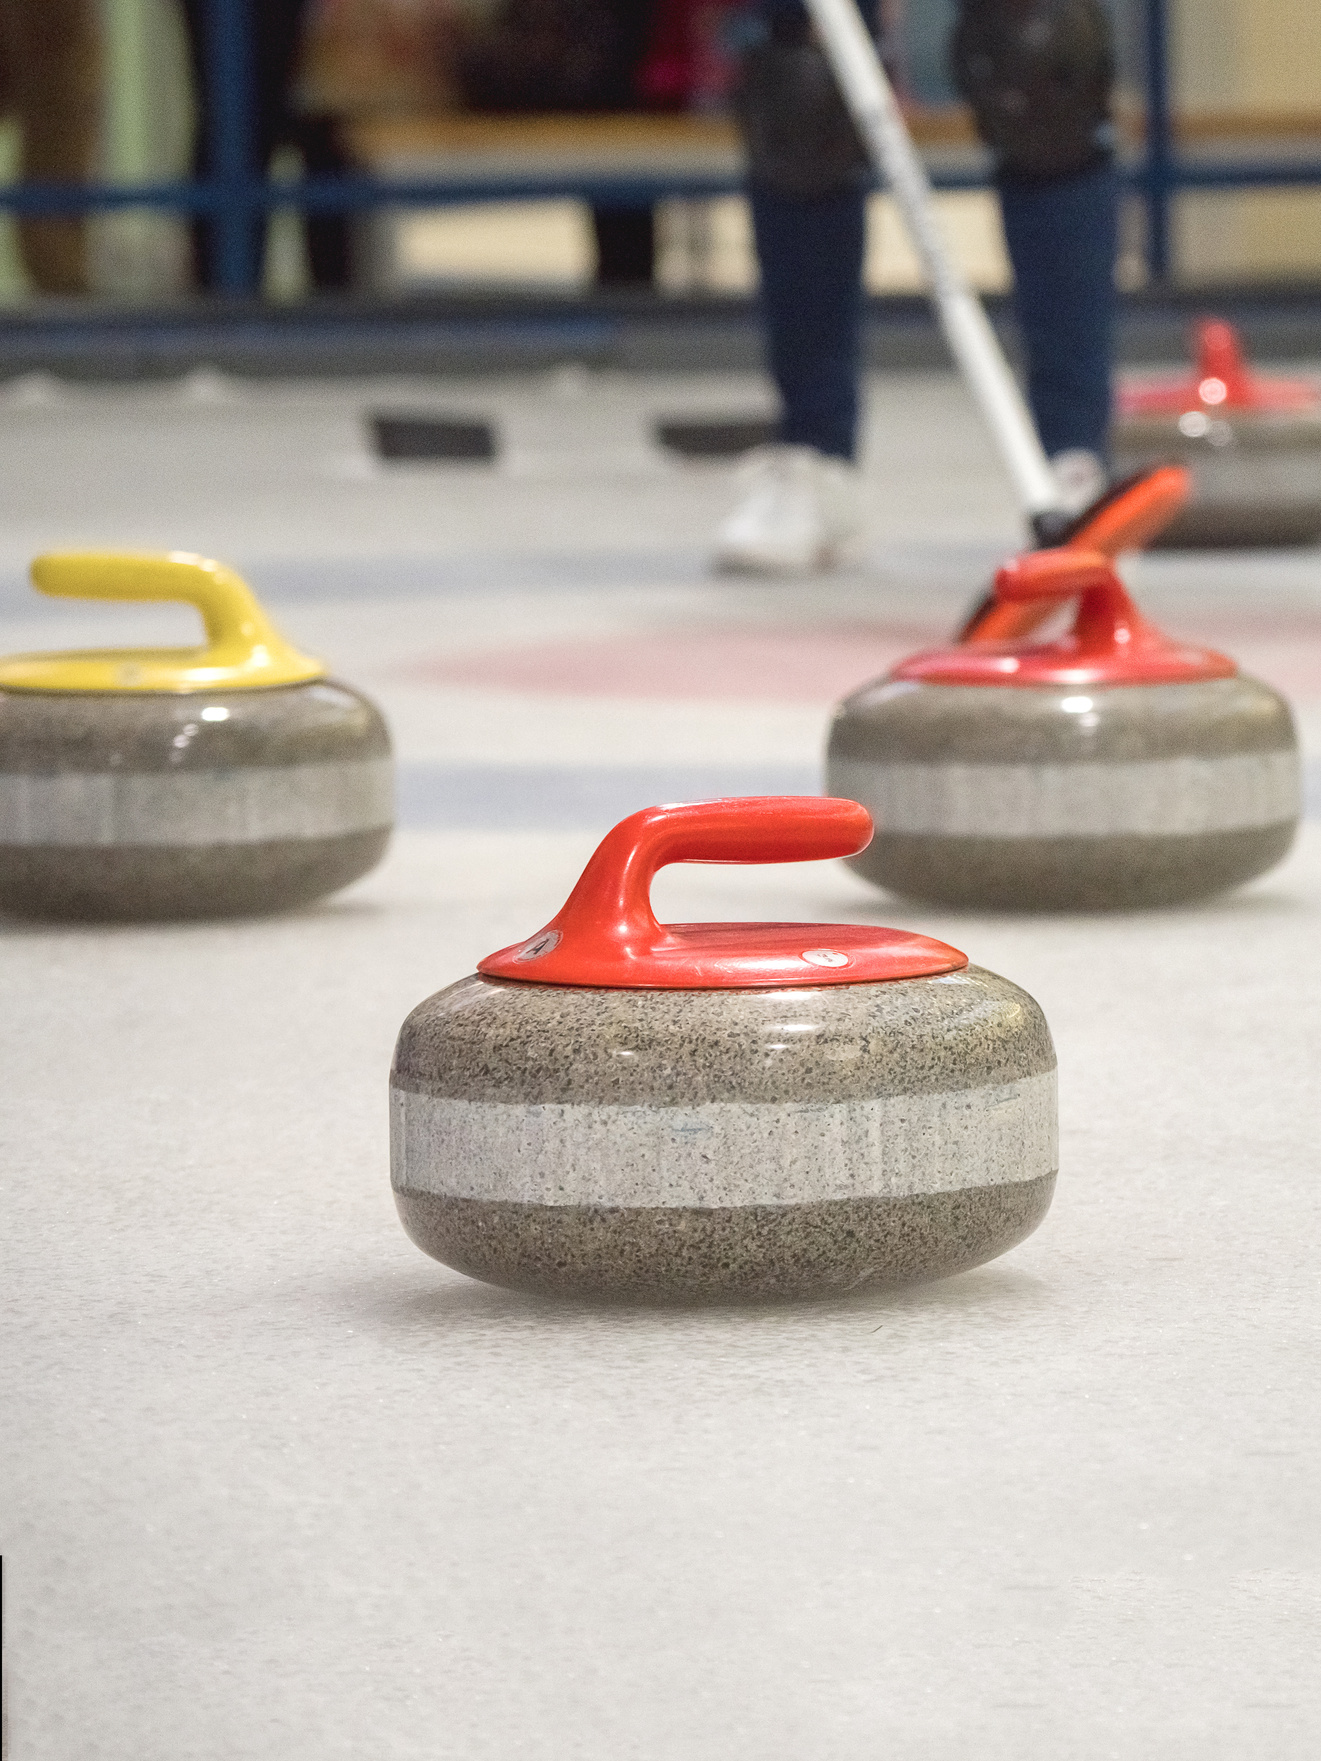 Curling stone on ice of a indoors rink.